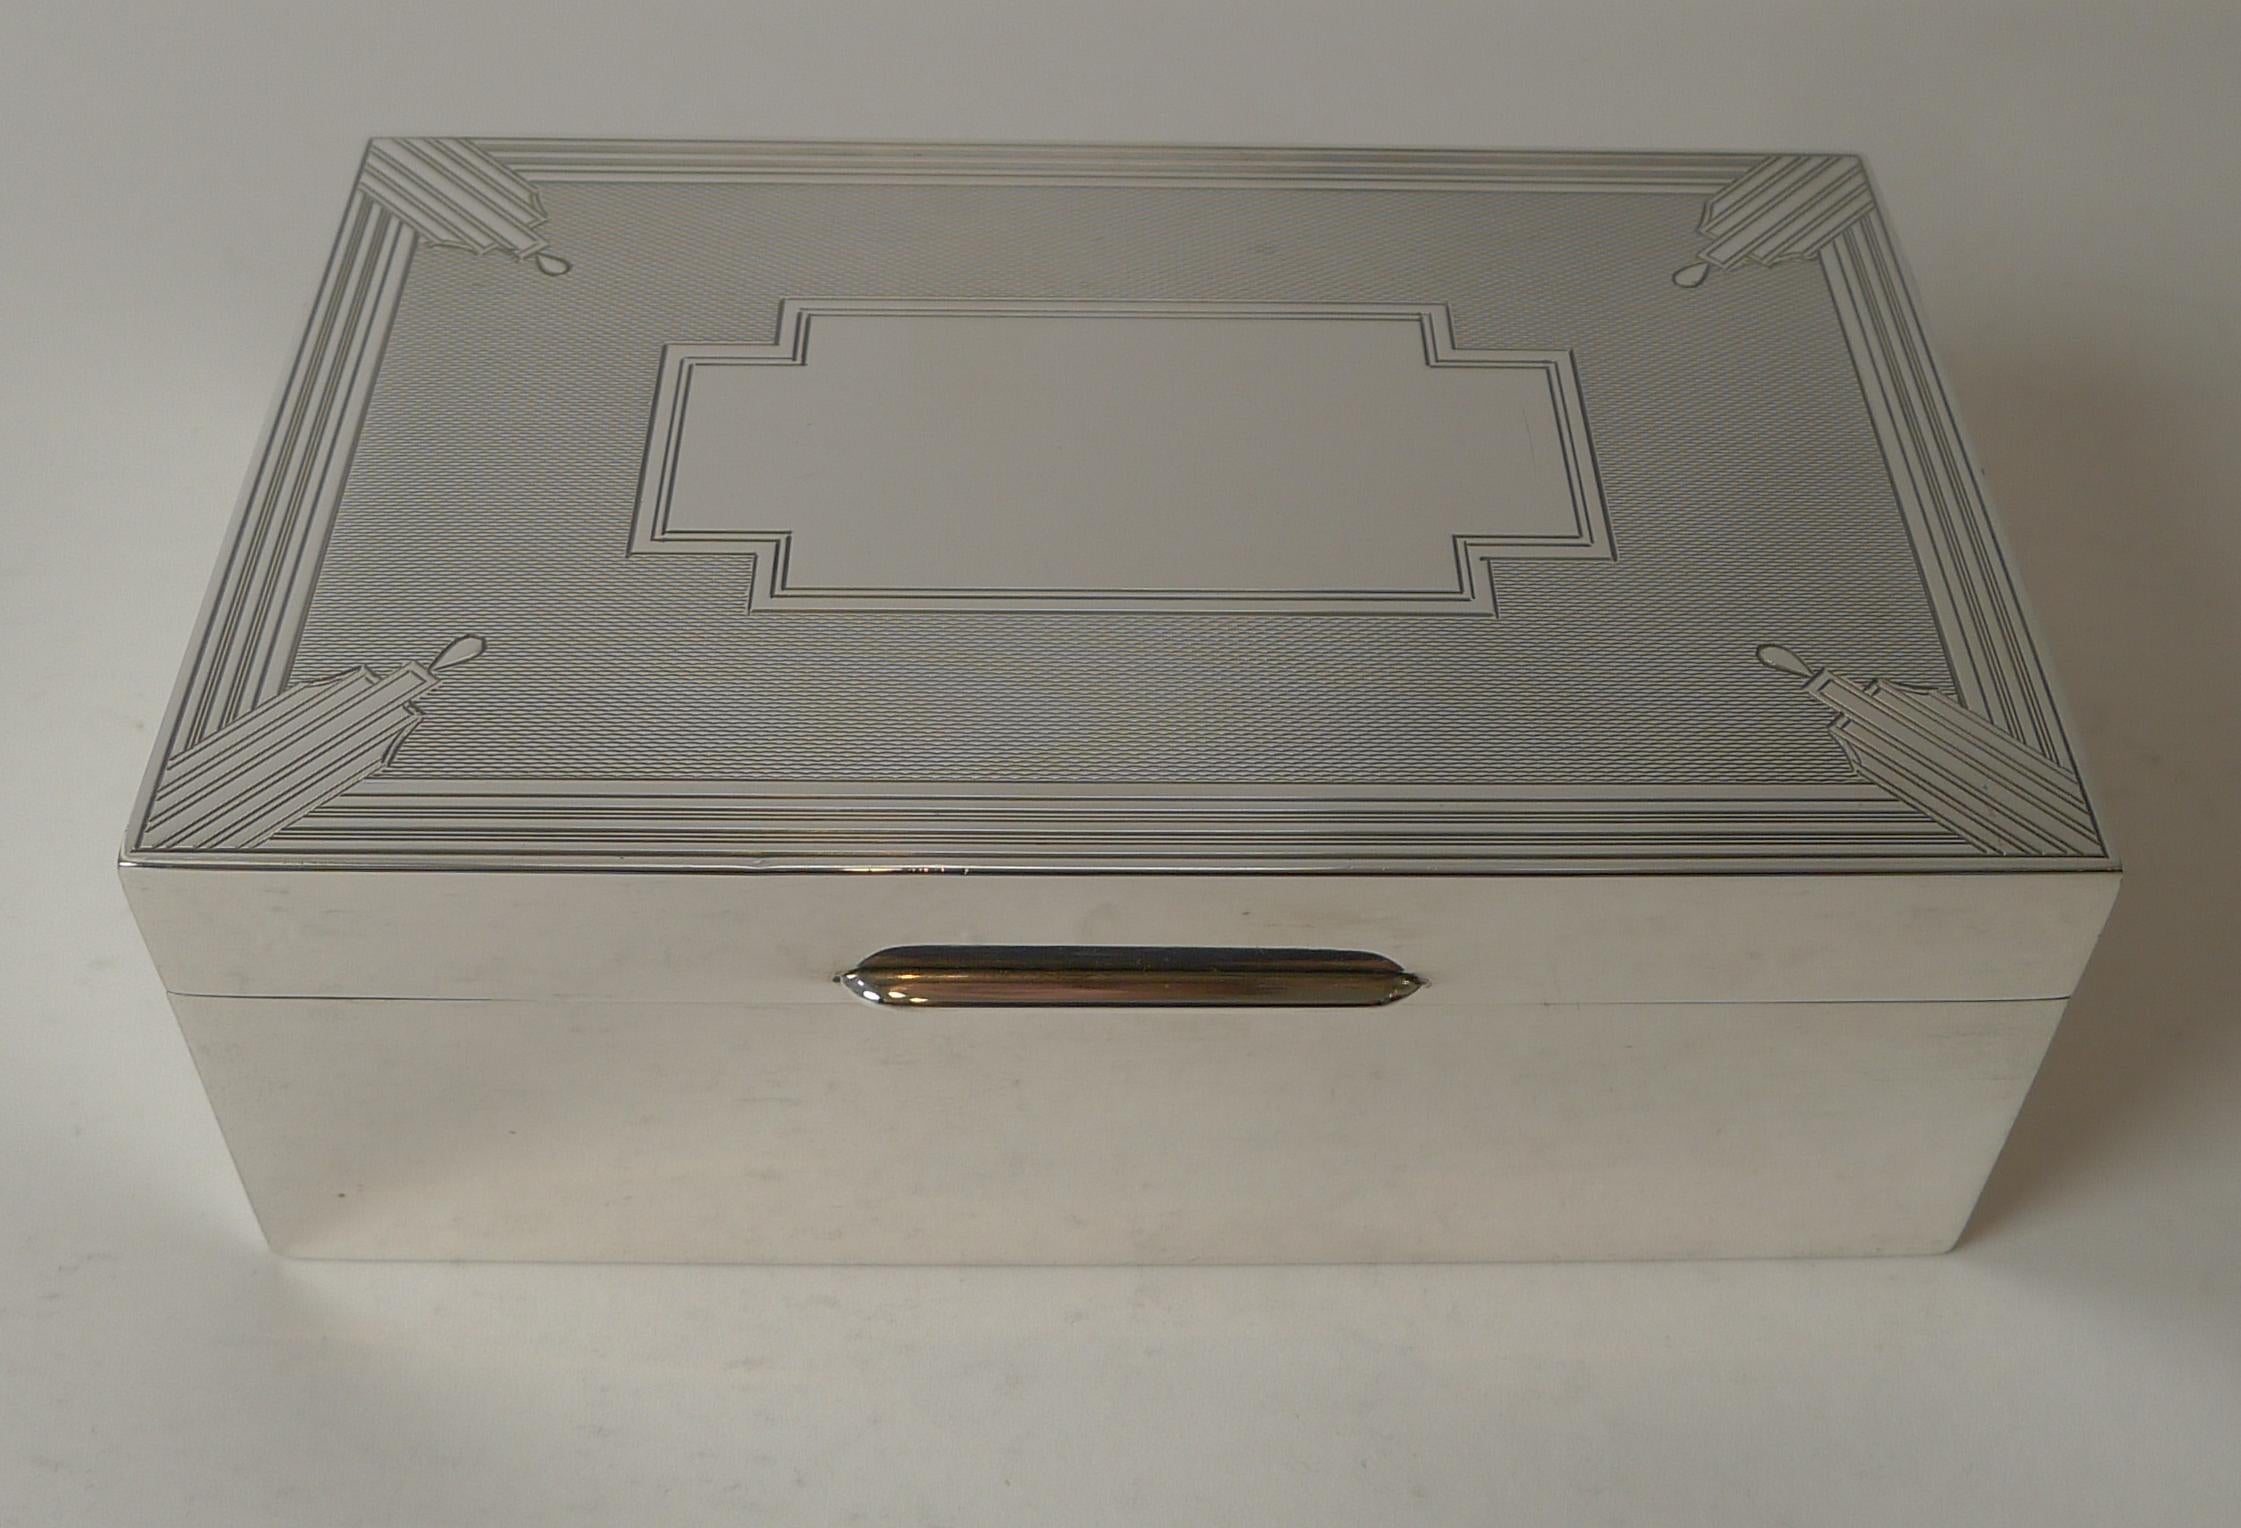 An outstanding and highly decorative box, originally for cigarettes but perfect for a desk box, cufflink or jewellery box or simply to enjoy it's sheer beauty.

The box is made from English sterling silver and is fully hallmarked for London 1934